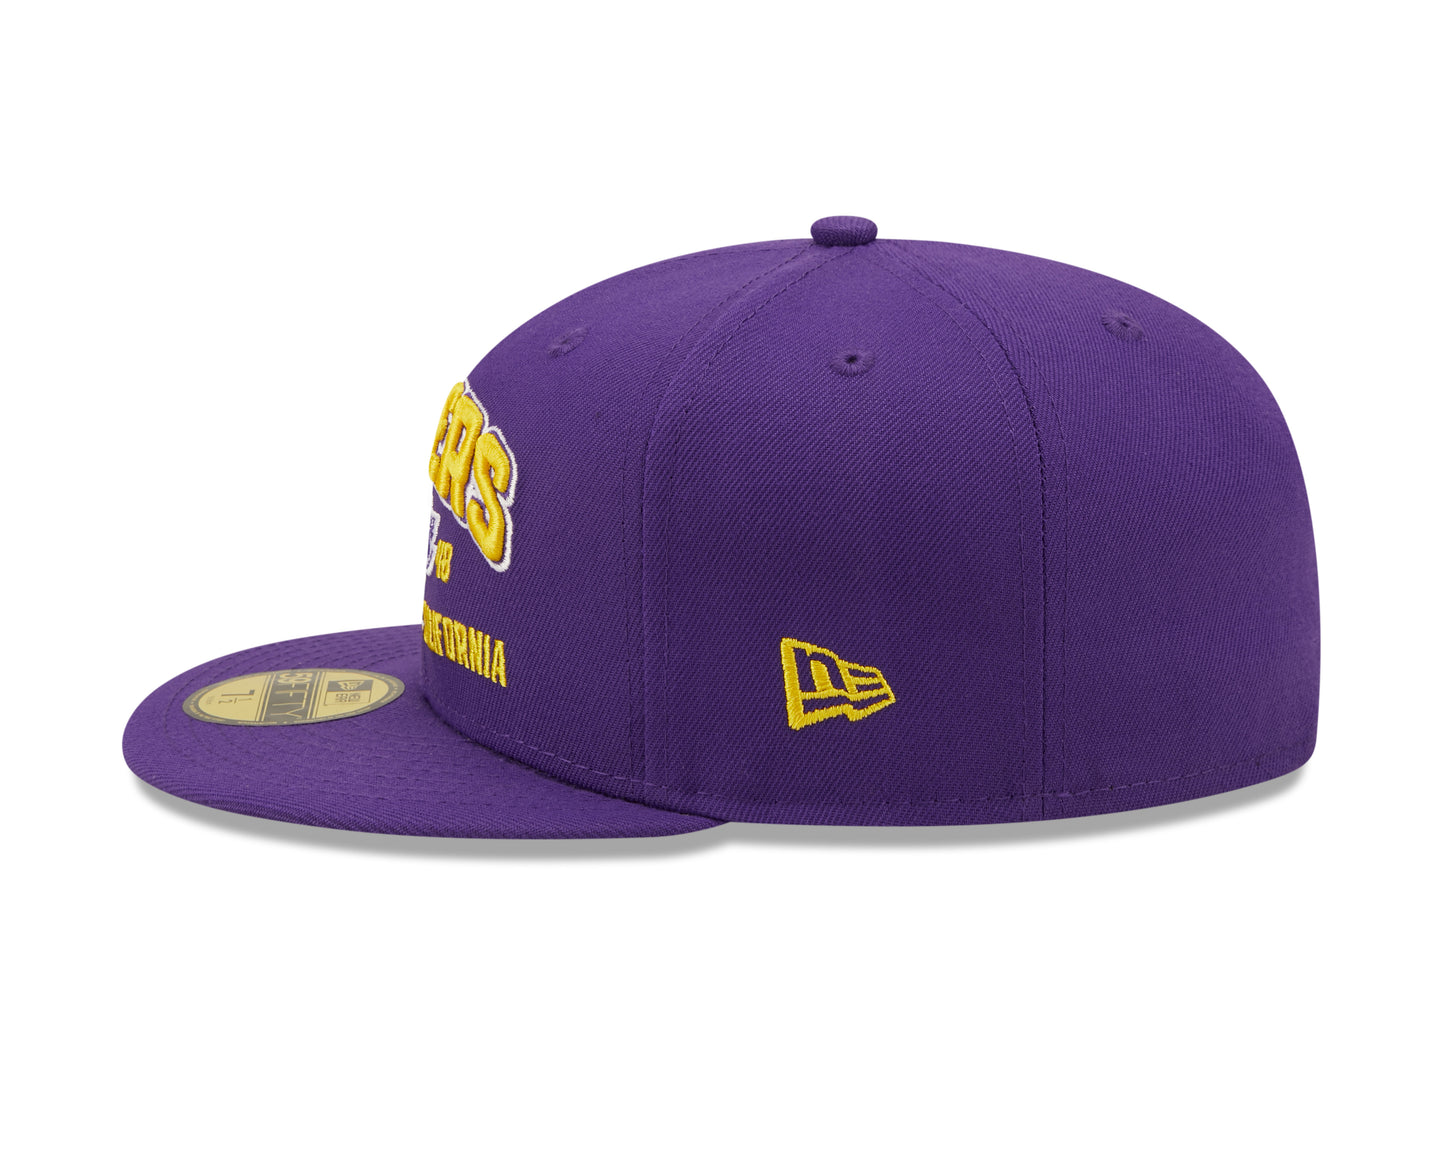 Los Angeles Lakers New Era Local Stacked 59FIFTY Fitted Hat - Purple